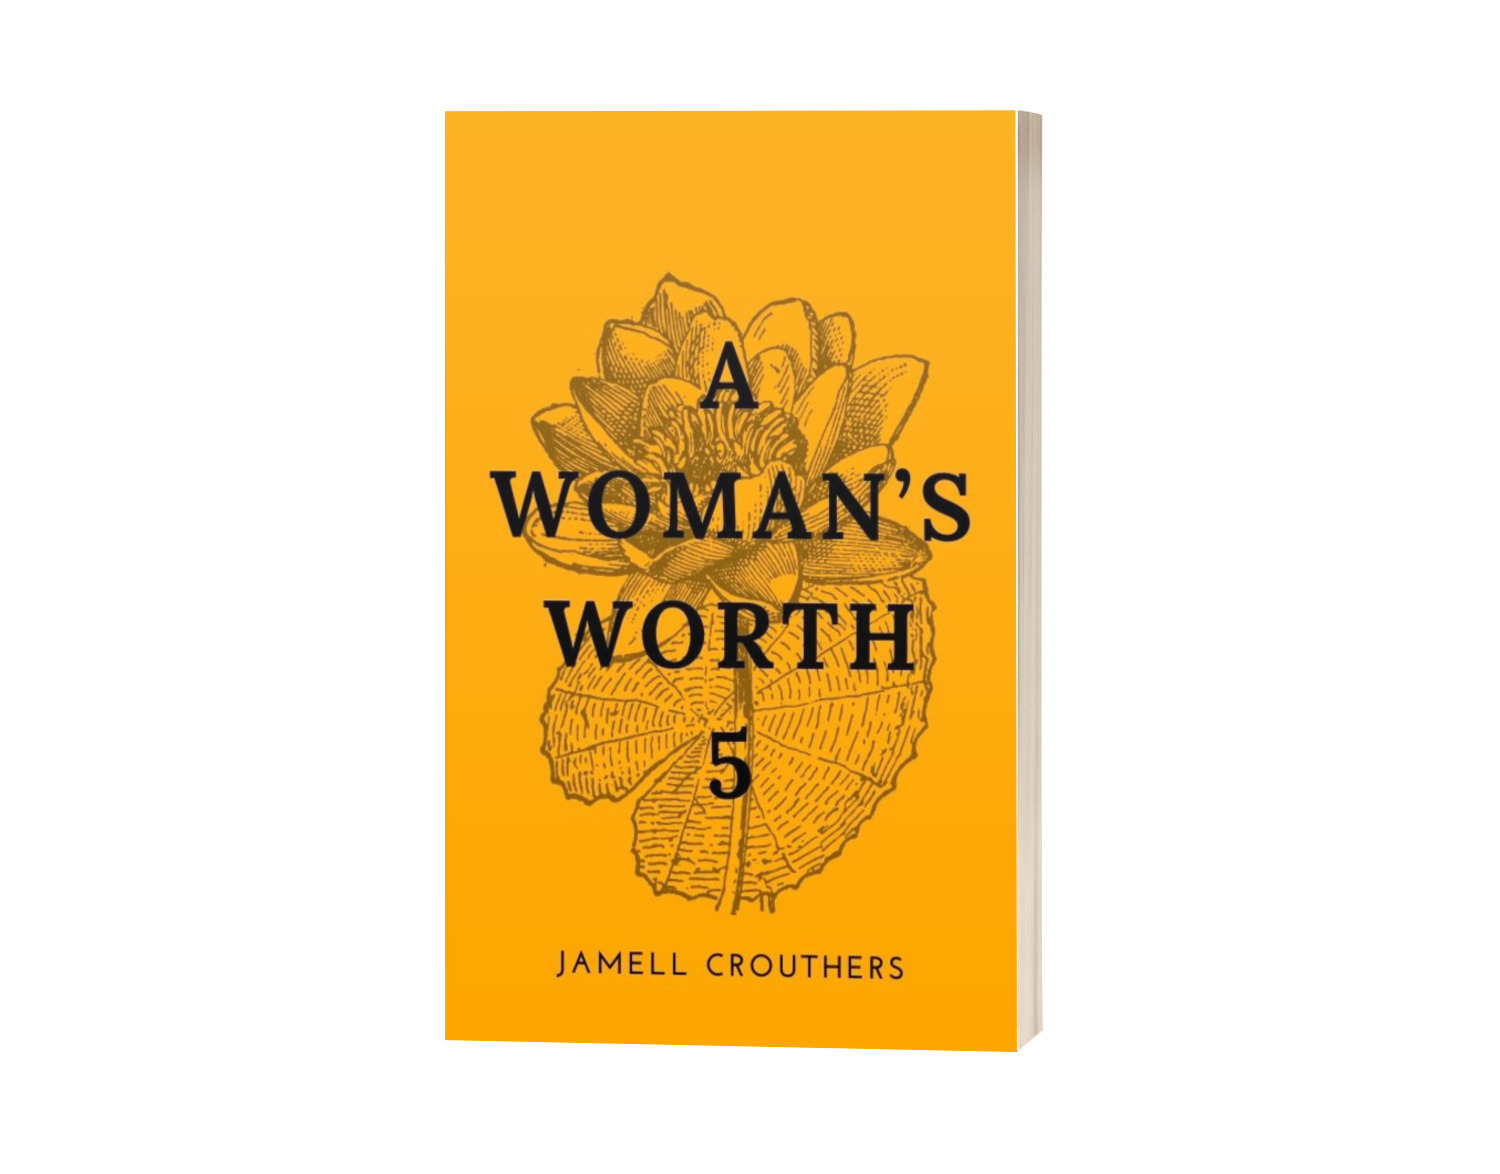 Writing "A Woman's Worth 5"